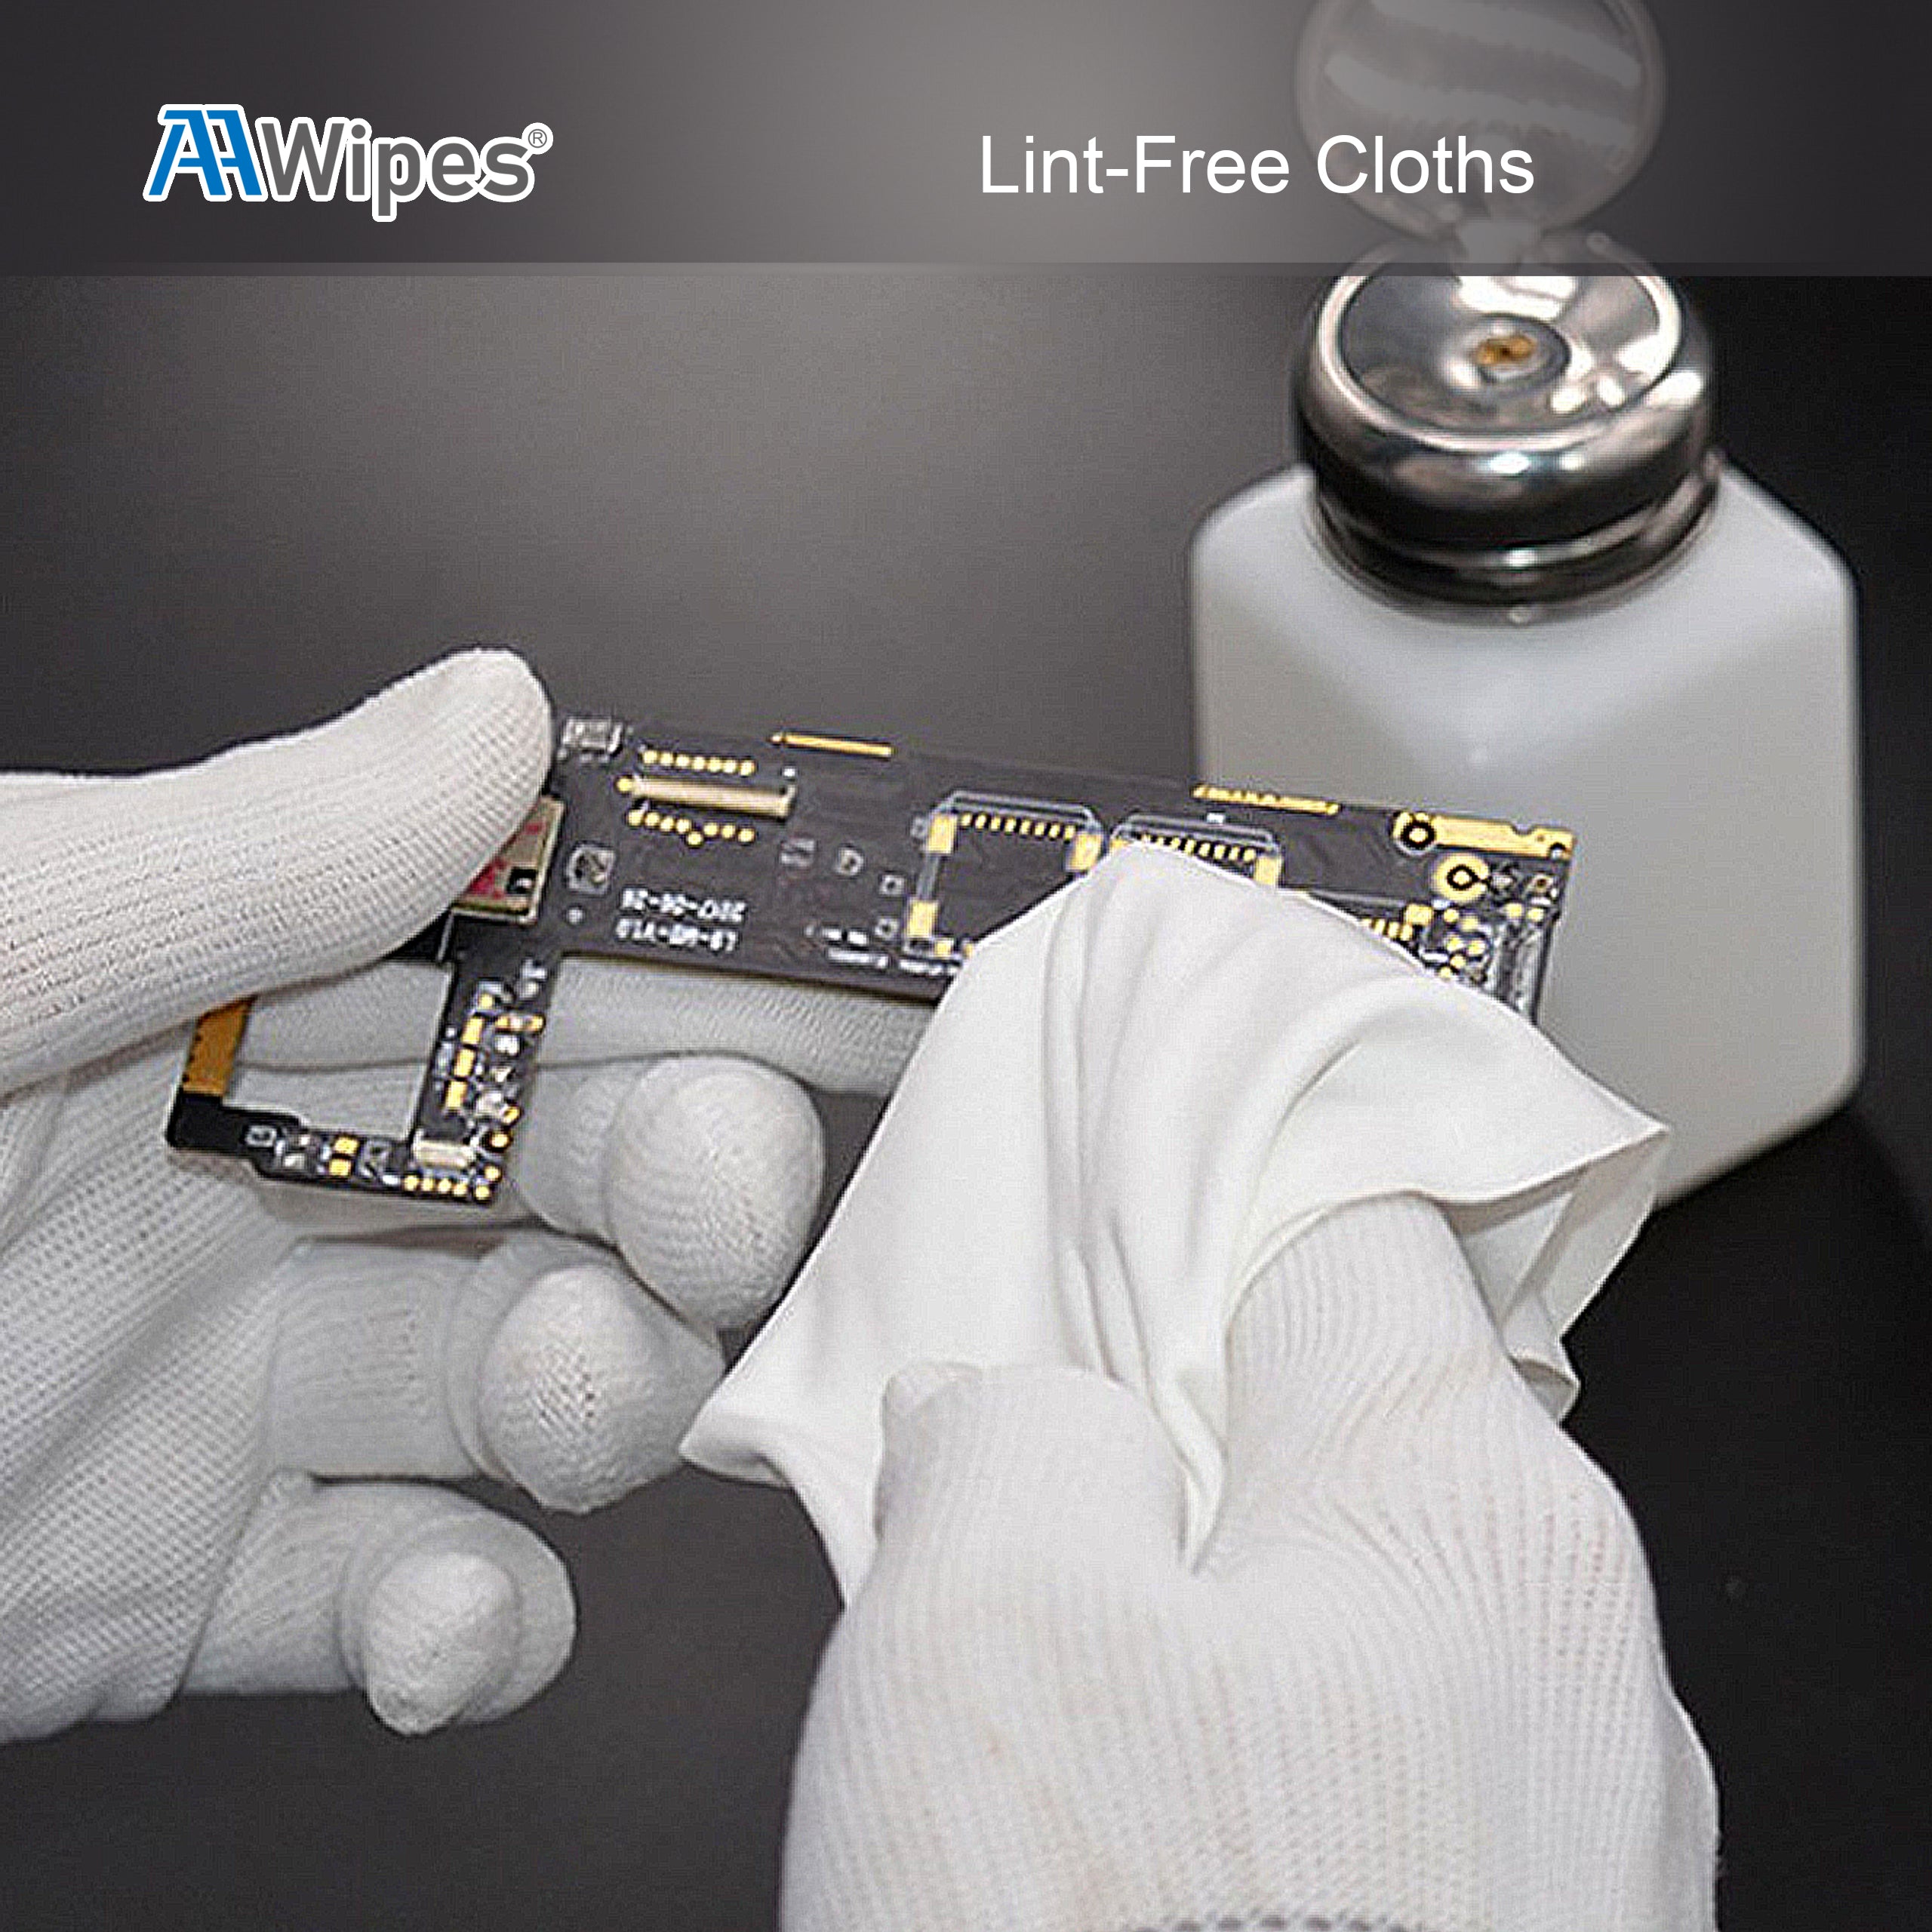 AAwipes lint-free cleanroom wipes Suitable for removing excess solder paste in SMT electronics factories, cleaning various electronic, mechanical, electrical, <span data-mce-fragment="1">optical, Biotech, Pharmaceutical and precision instruments, and sensitive components such as printing machines, lenses, microelectronics, Critical environment&nbsp;</span><span data-mce-fragment="1">and workstation surfaces 